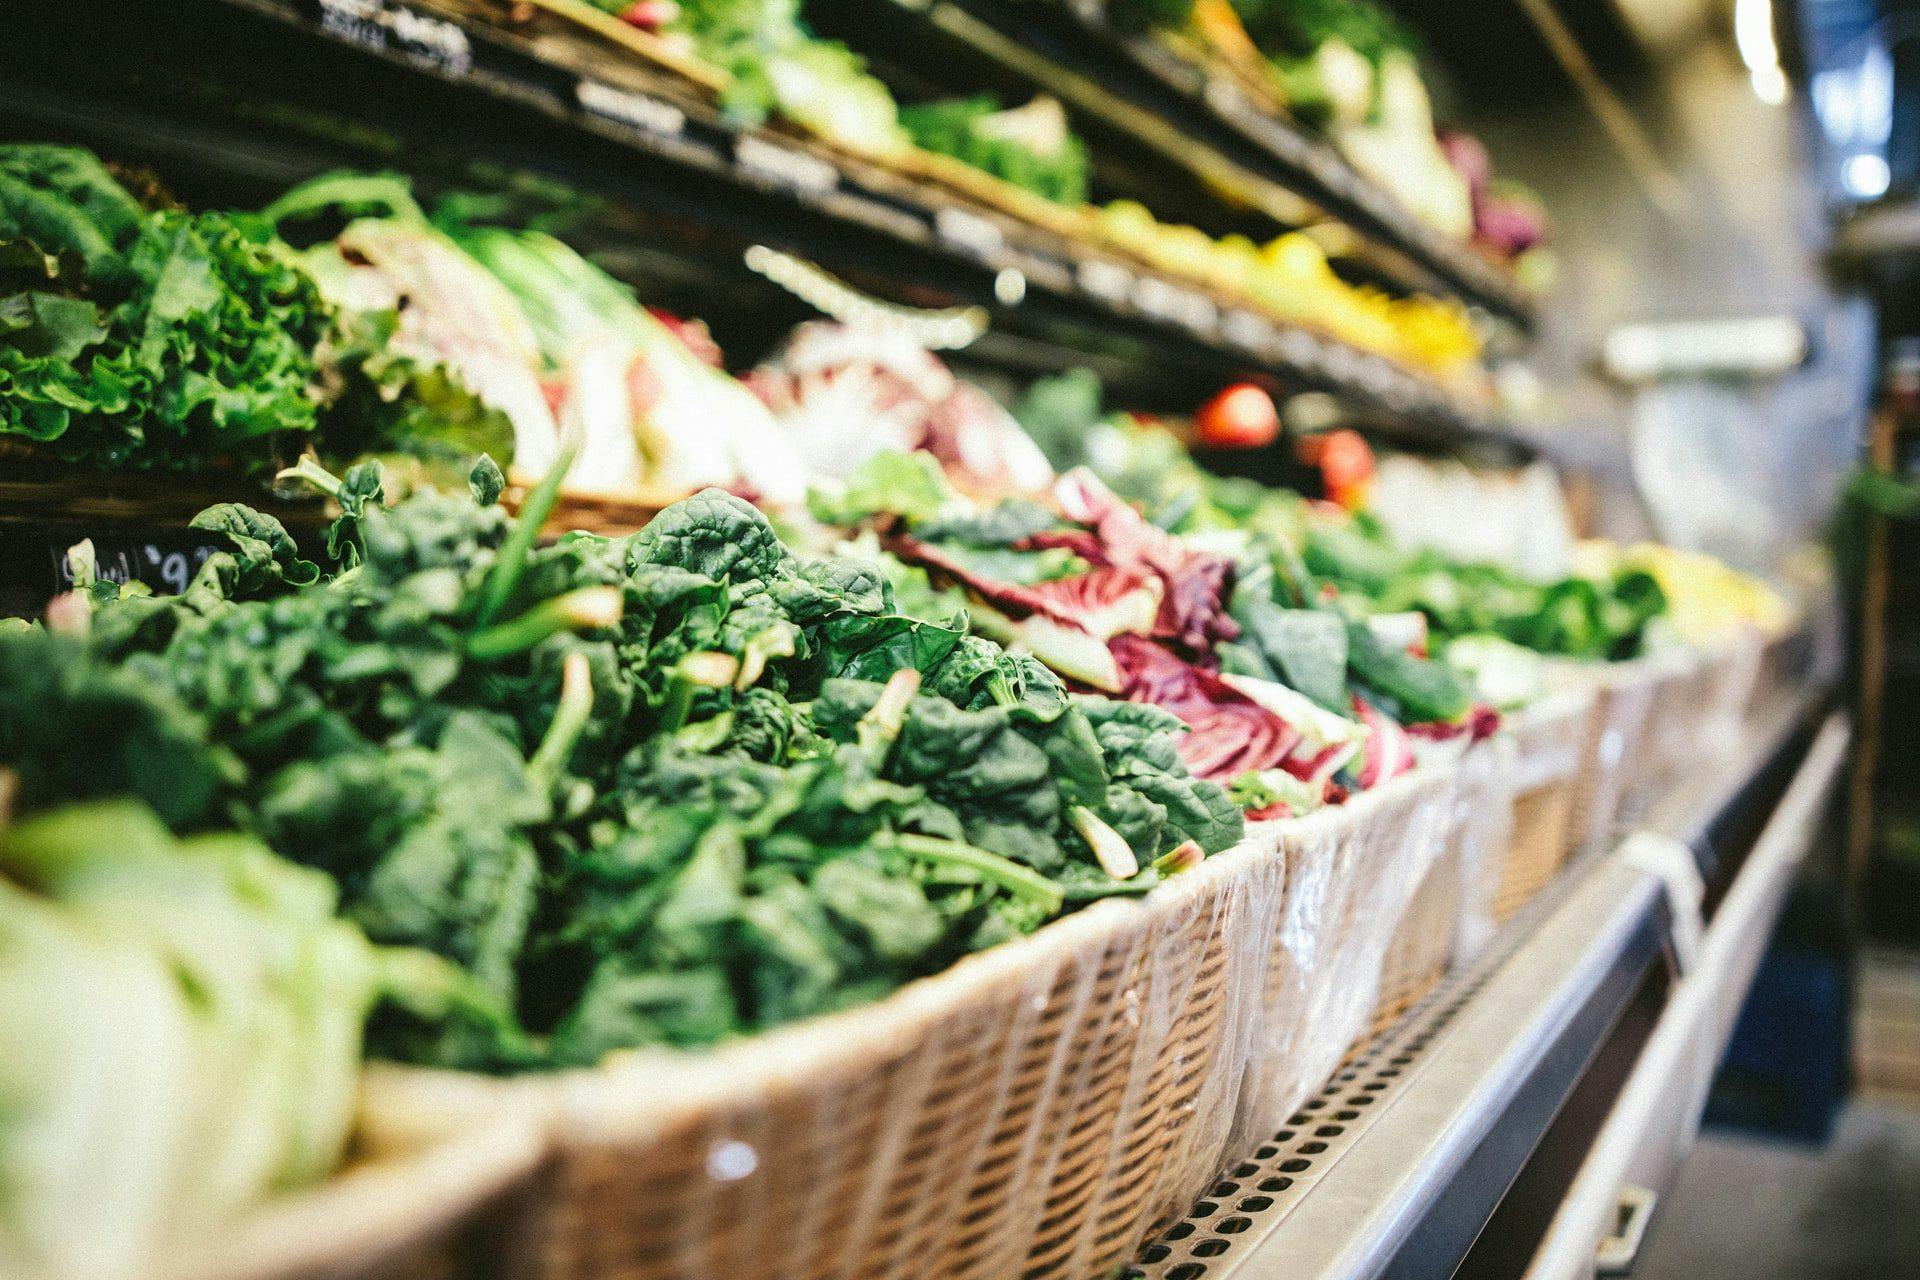 Does It Really Matter Where You Buy Your Fruits and Vegetables? The Answer Will Surprise You